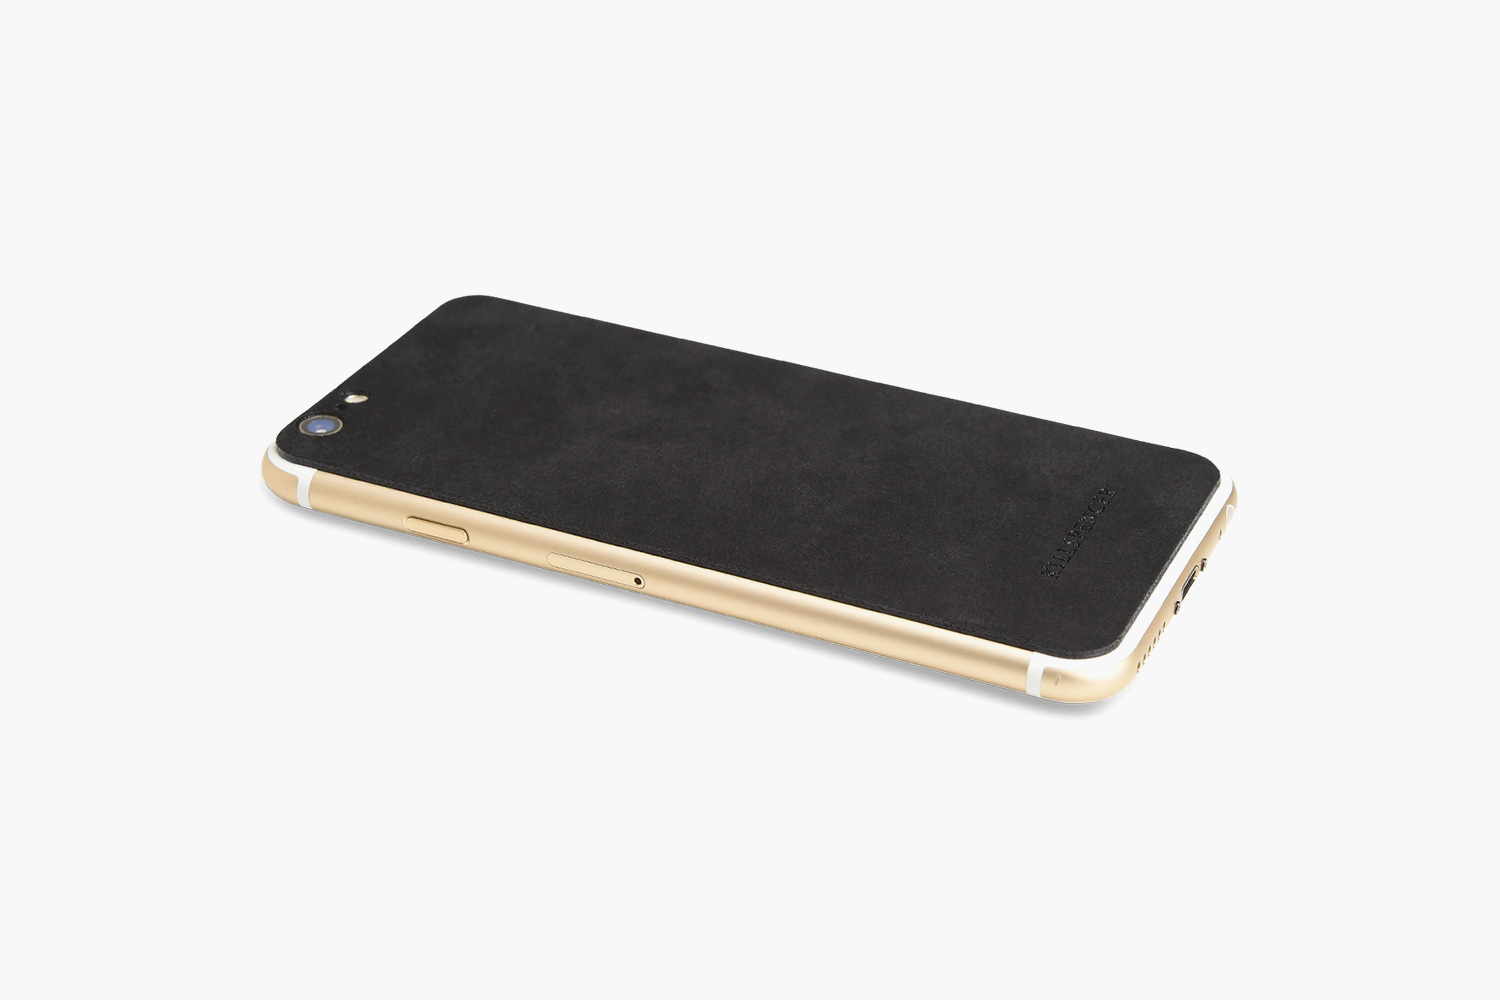 killspencer-iphone-6-and-iphone-6-plus-accessories-collection-04